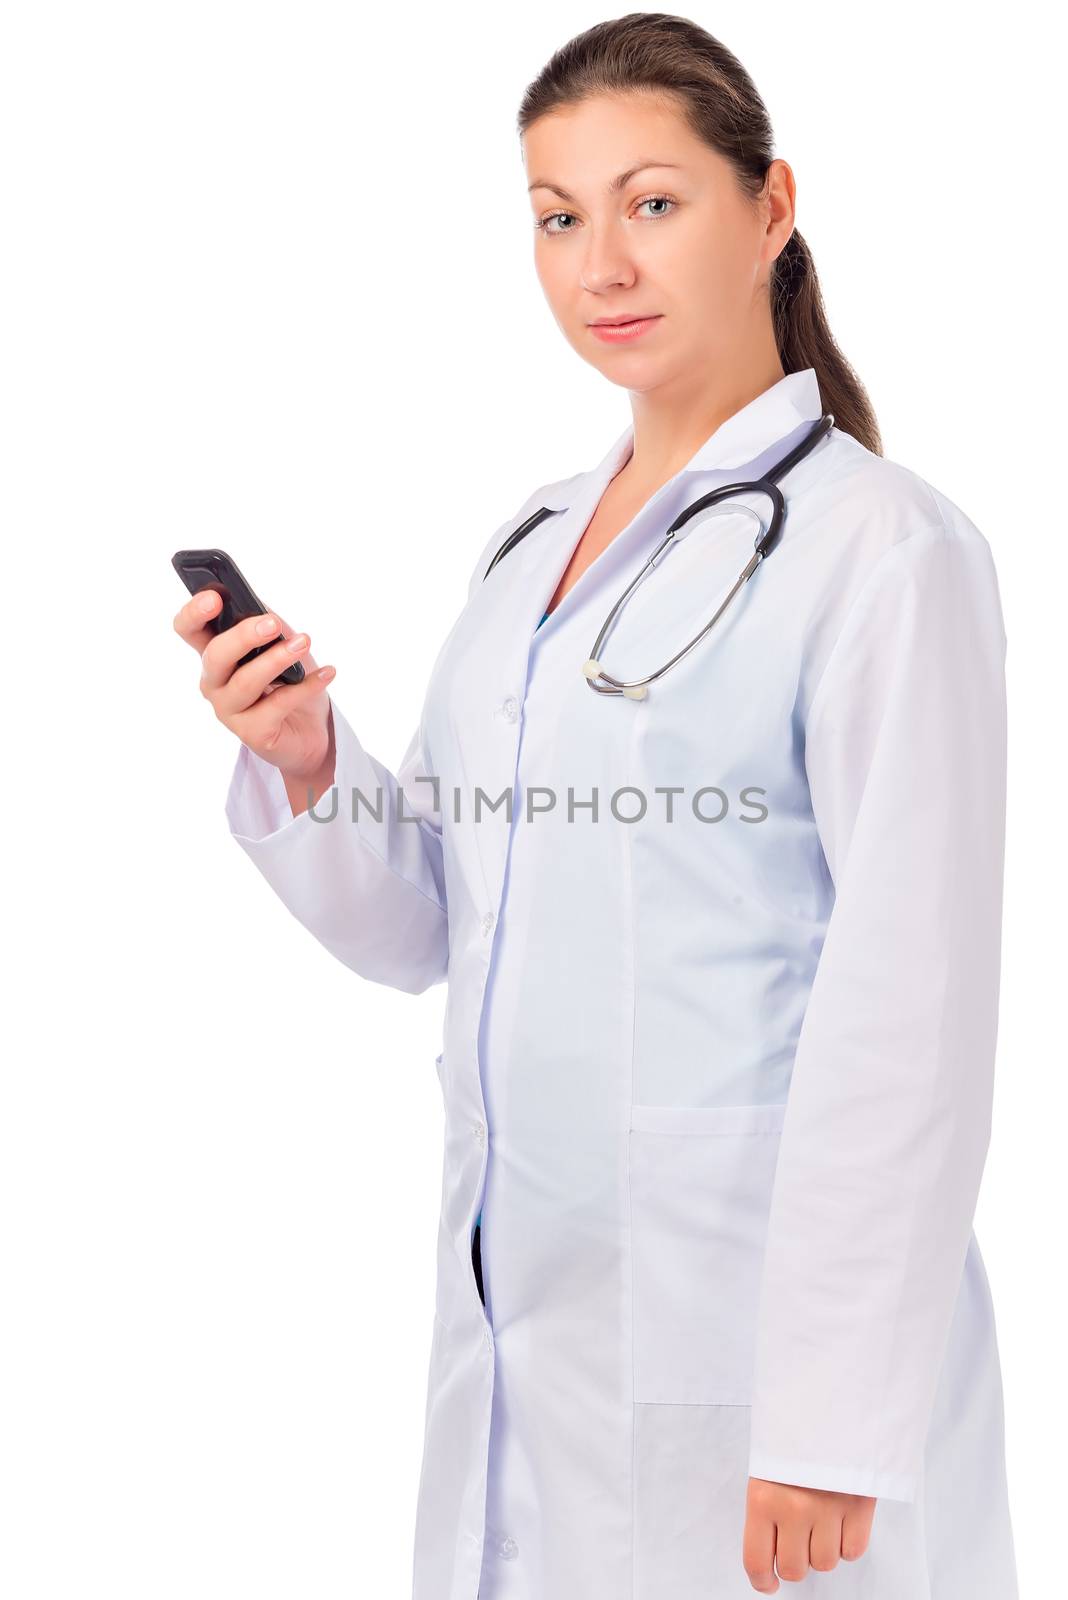 doctor in a medical lab coat with a phone in his hand